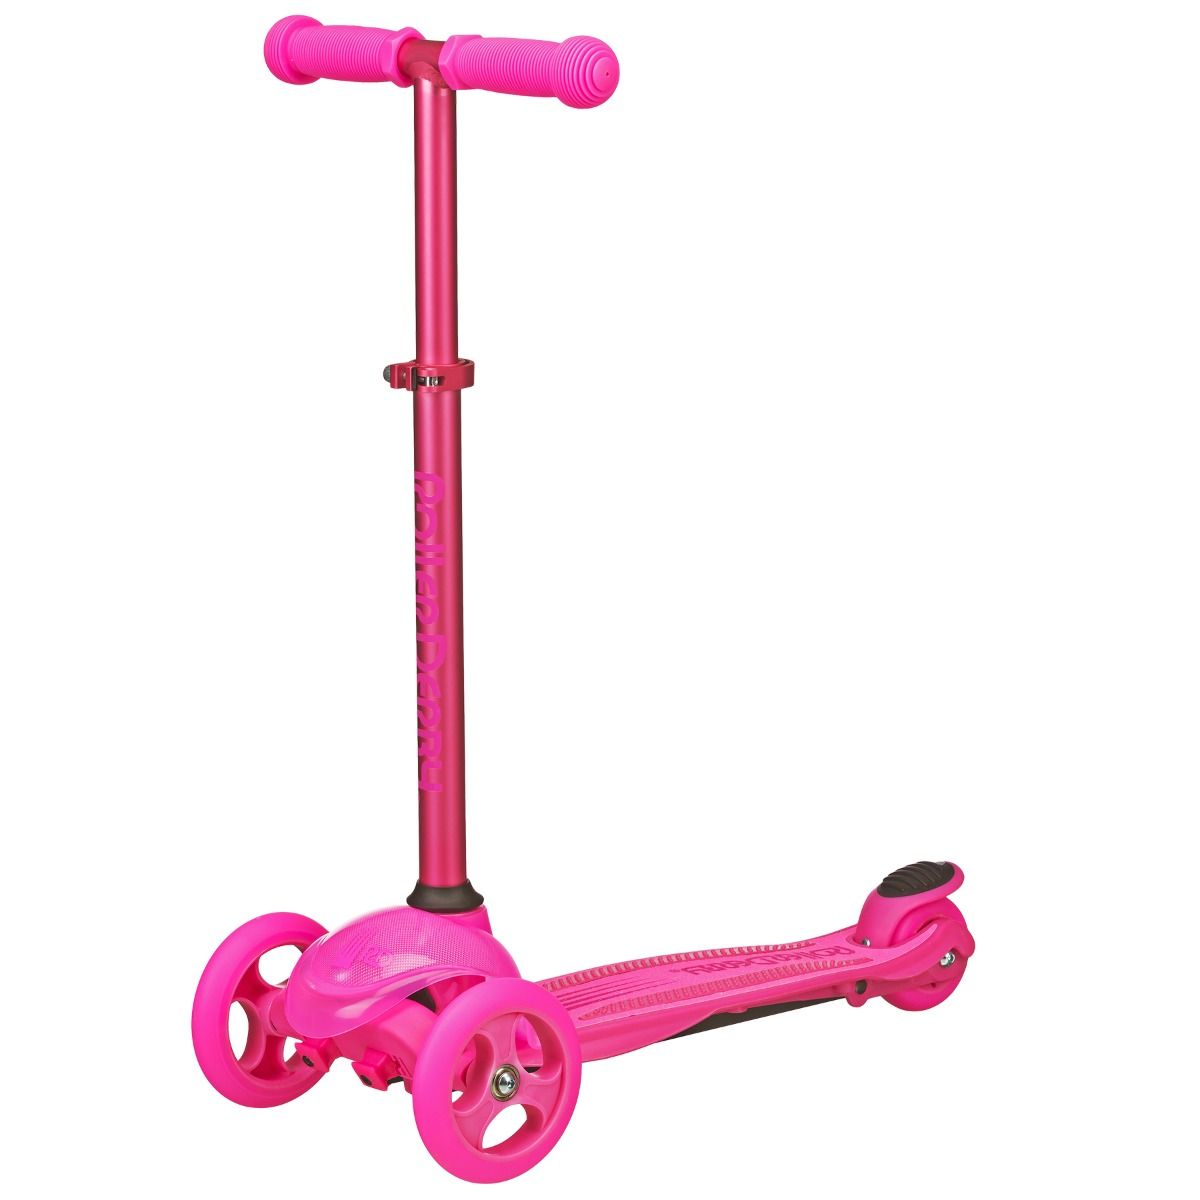 ROLLER DERBY 3 WHEEL SCOOTER PINK - WRDS101PK